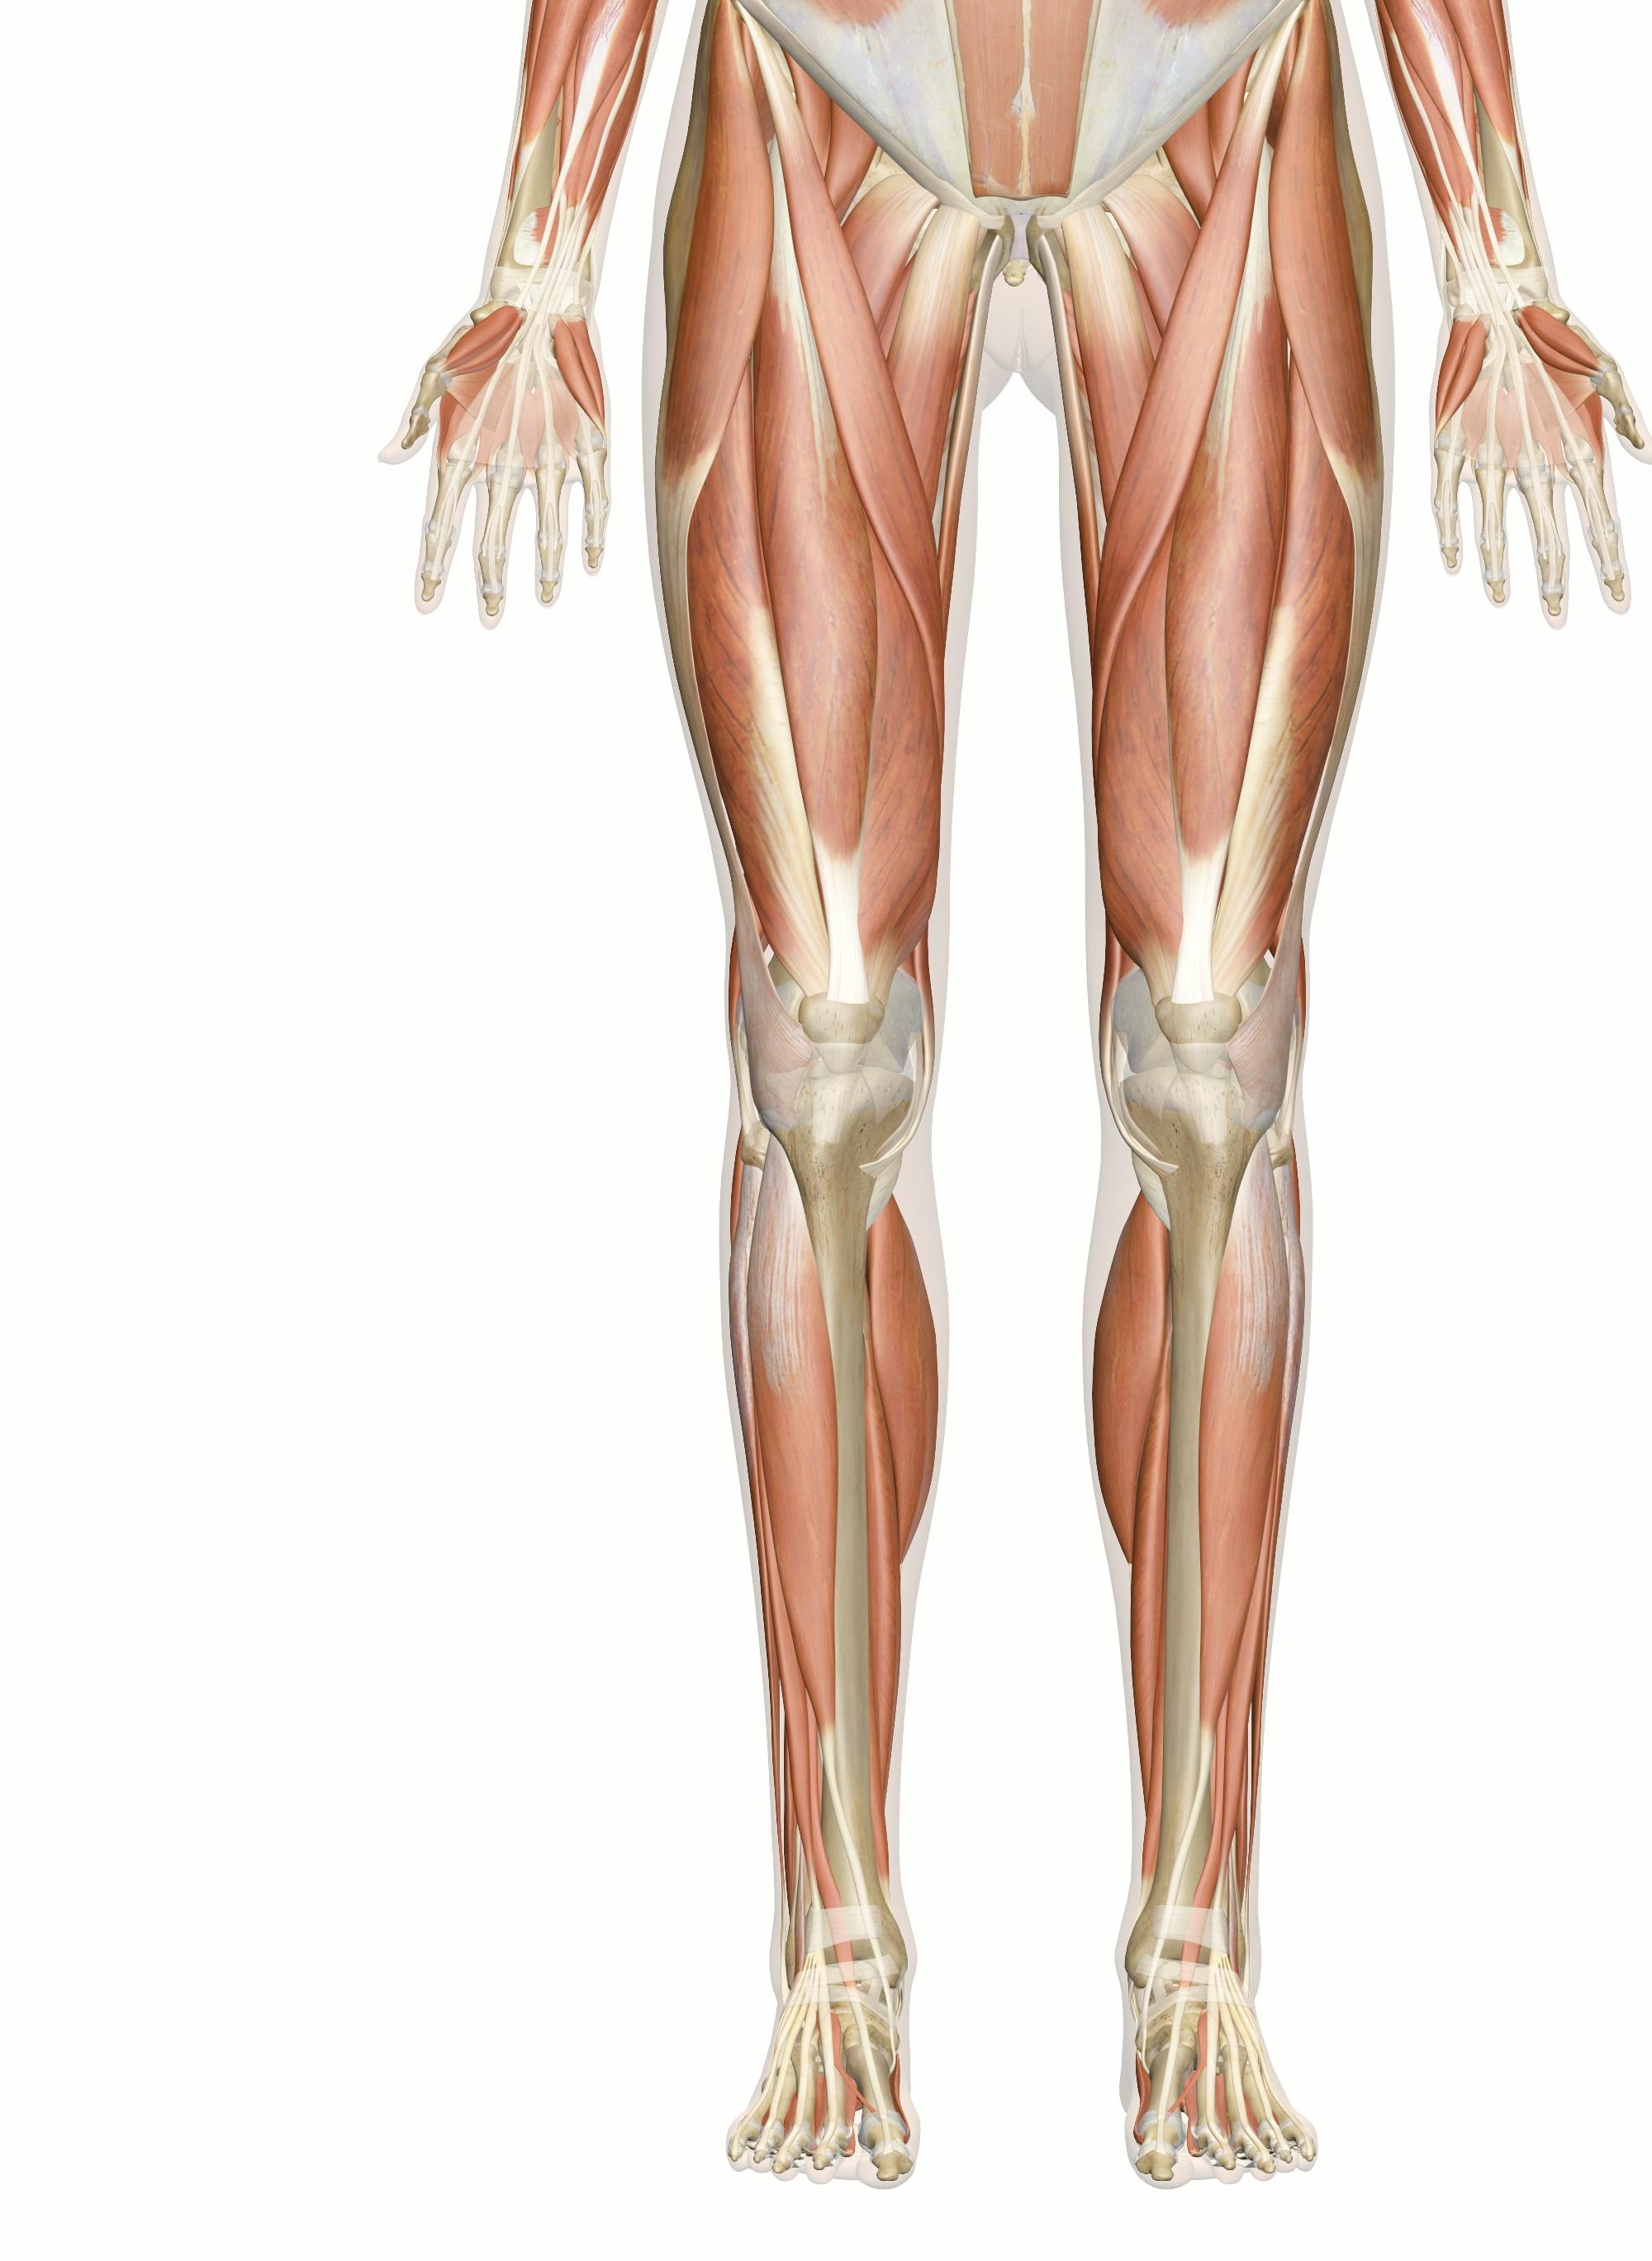 Anatomy Stock Images  ankle-movements-plantar-flexion-dorsal